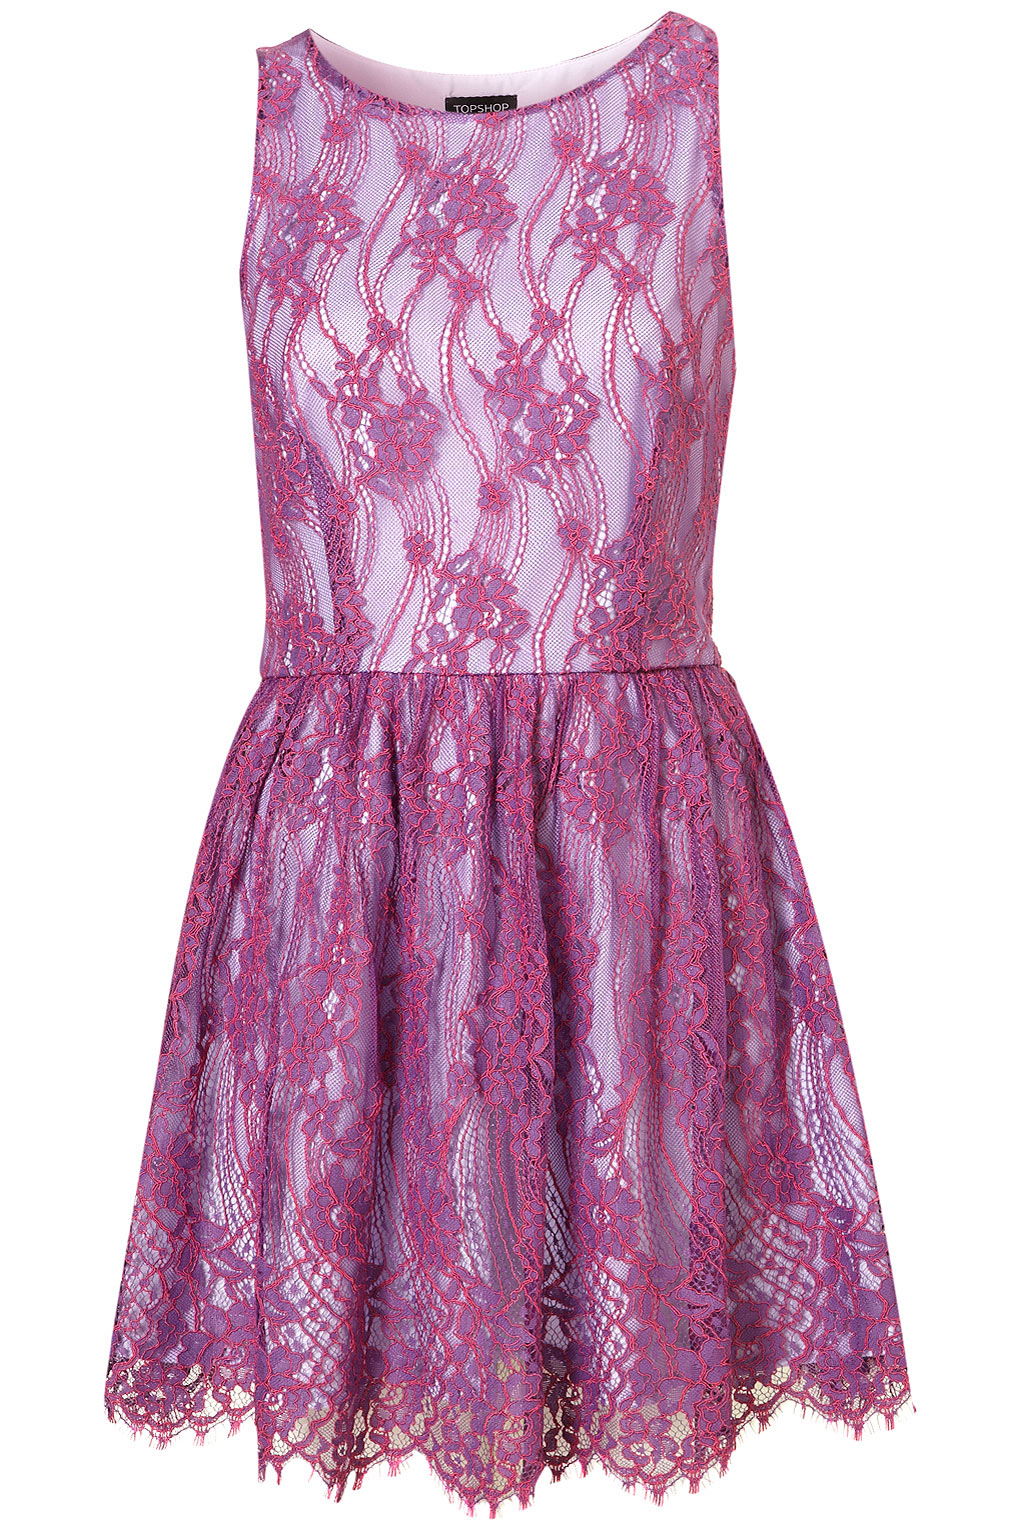 Lyst Topshop Lace Skater Dress In Purple 2875